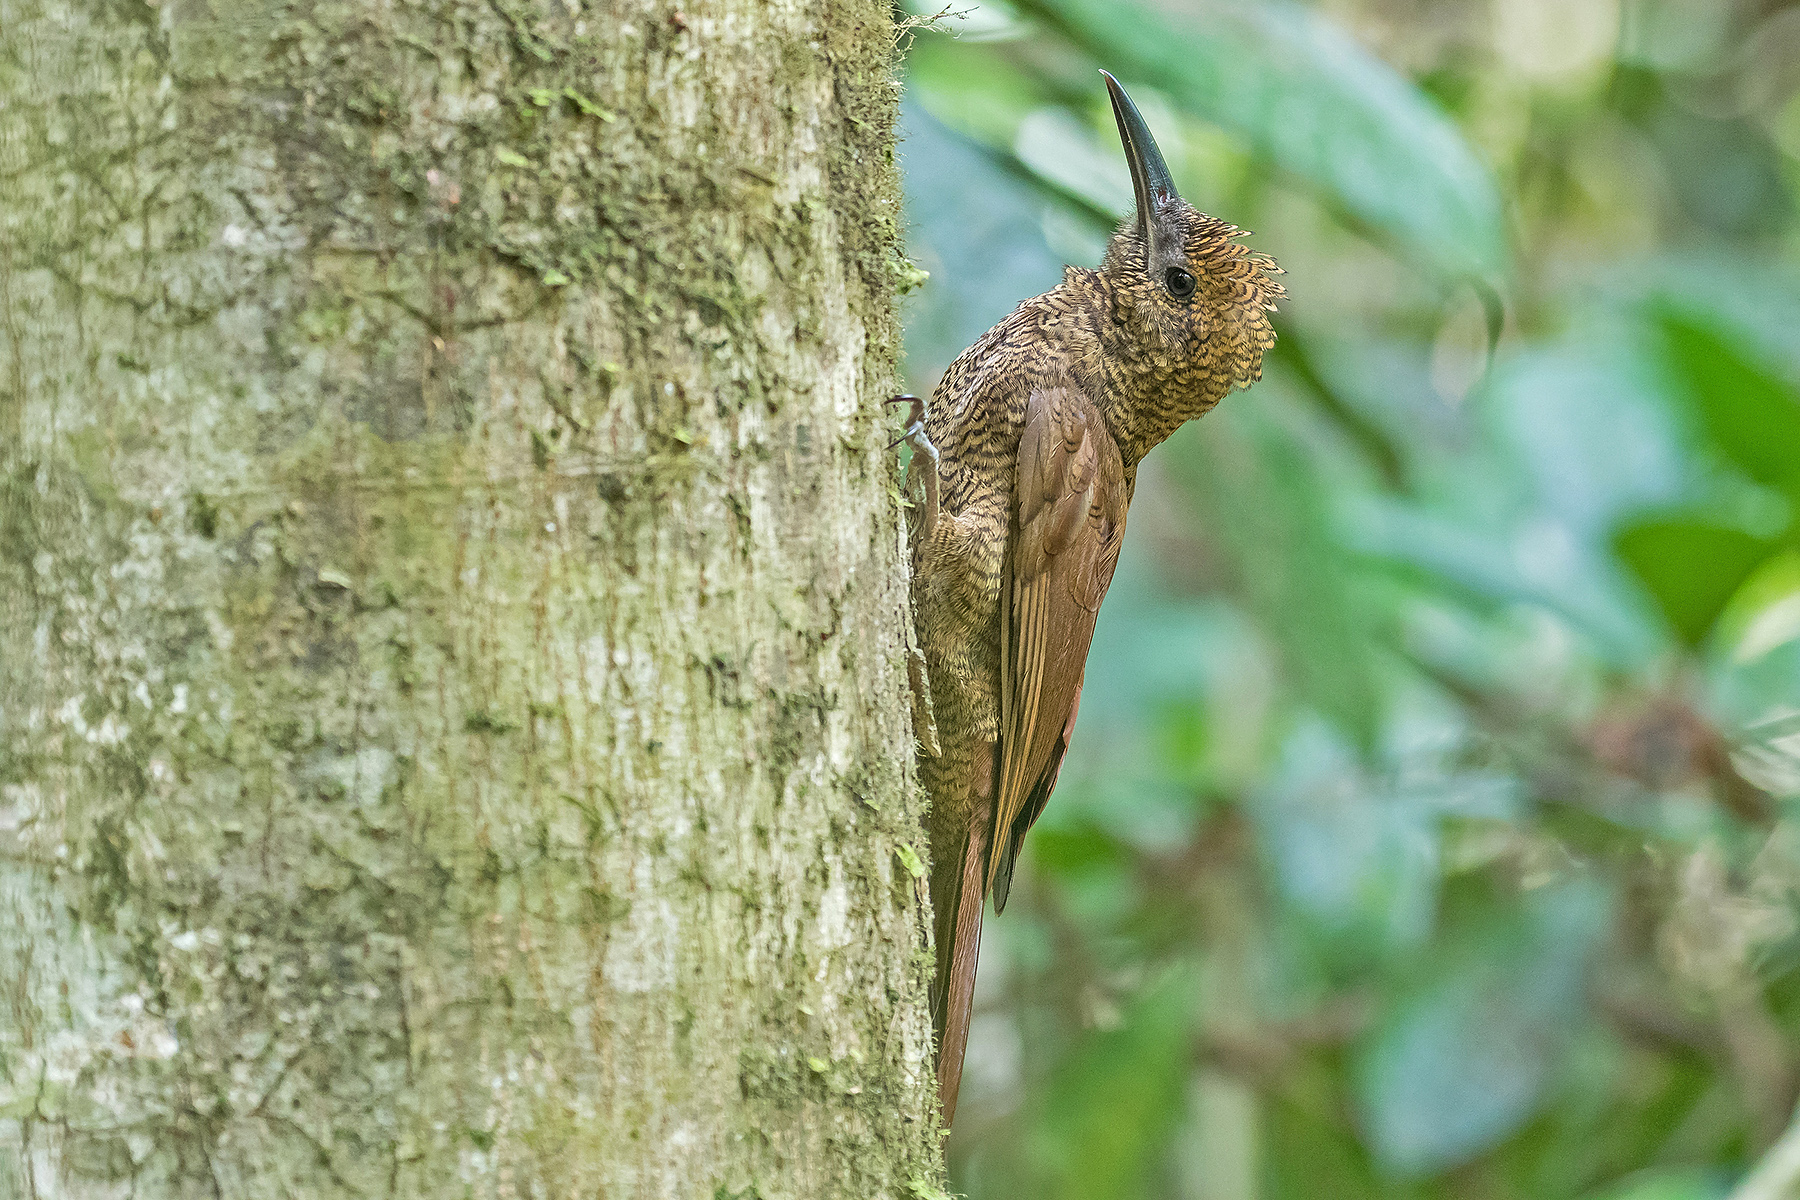 Northern Barred Woodcreeper in Costa Rica (image by Pete Morris)